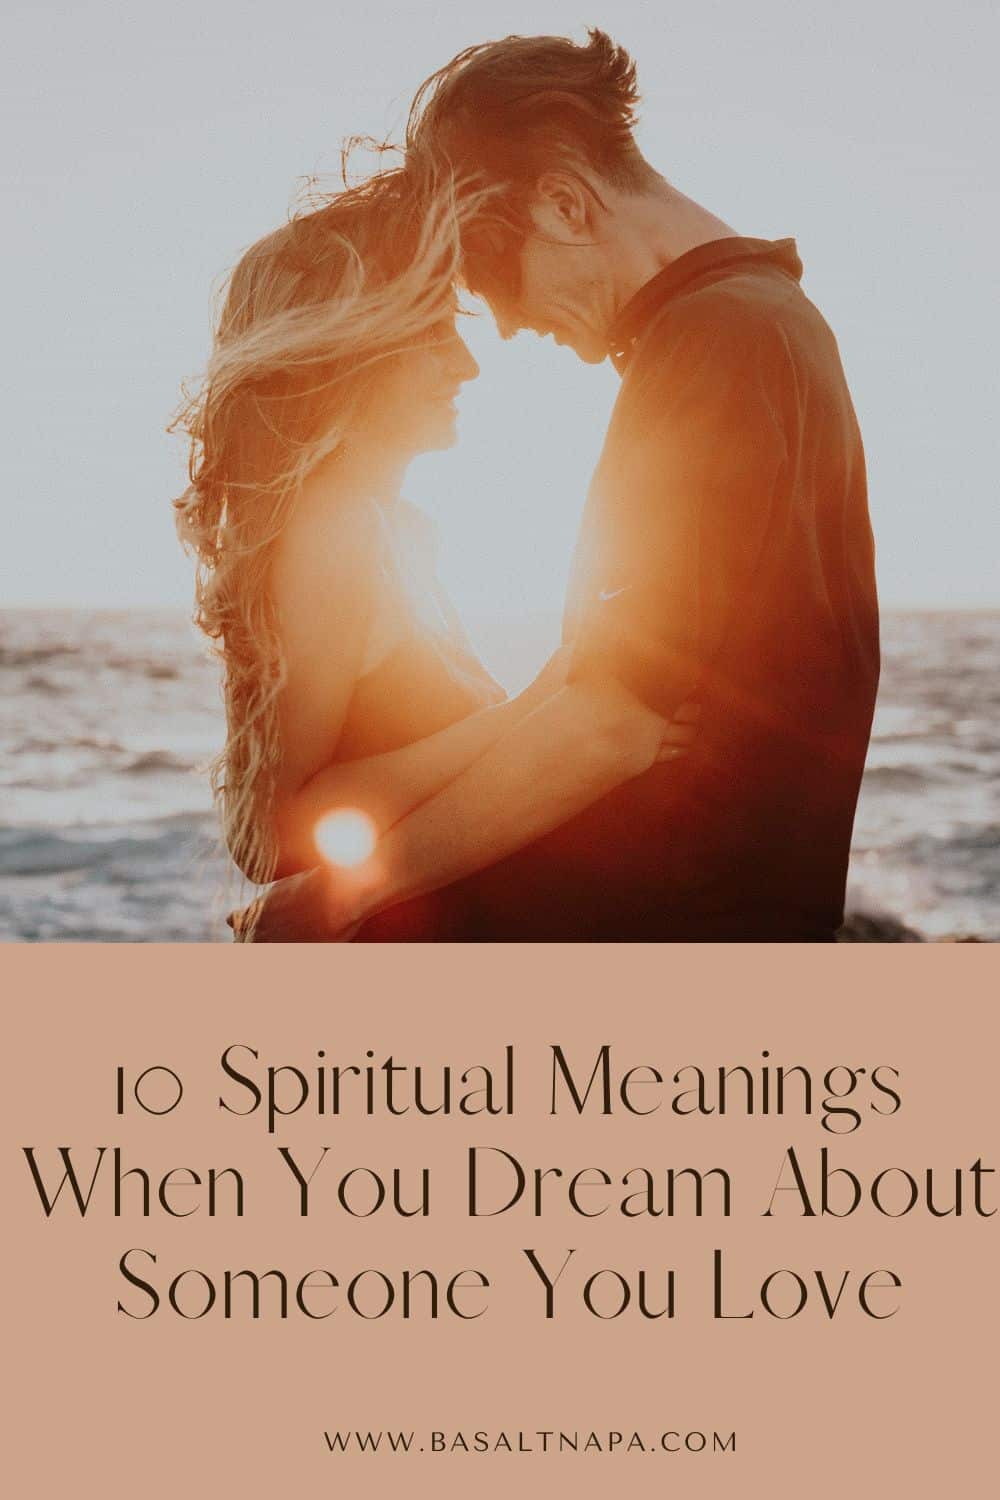 What does it mean when you dream about someone you love?